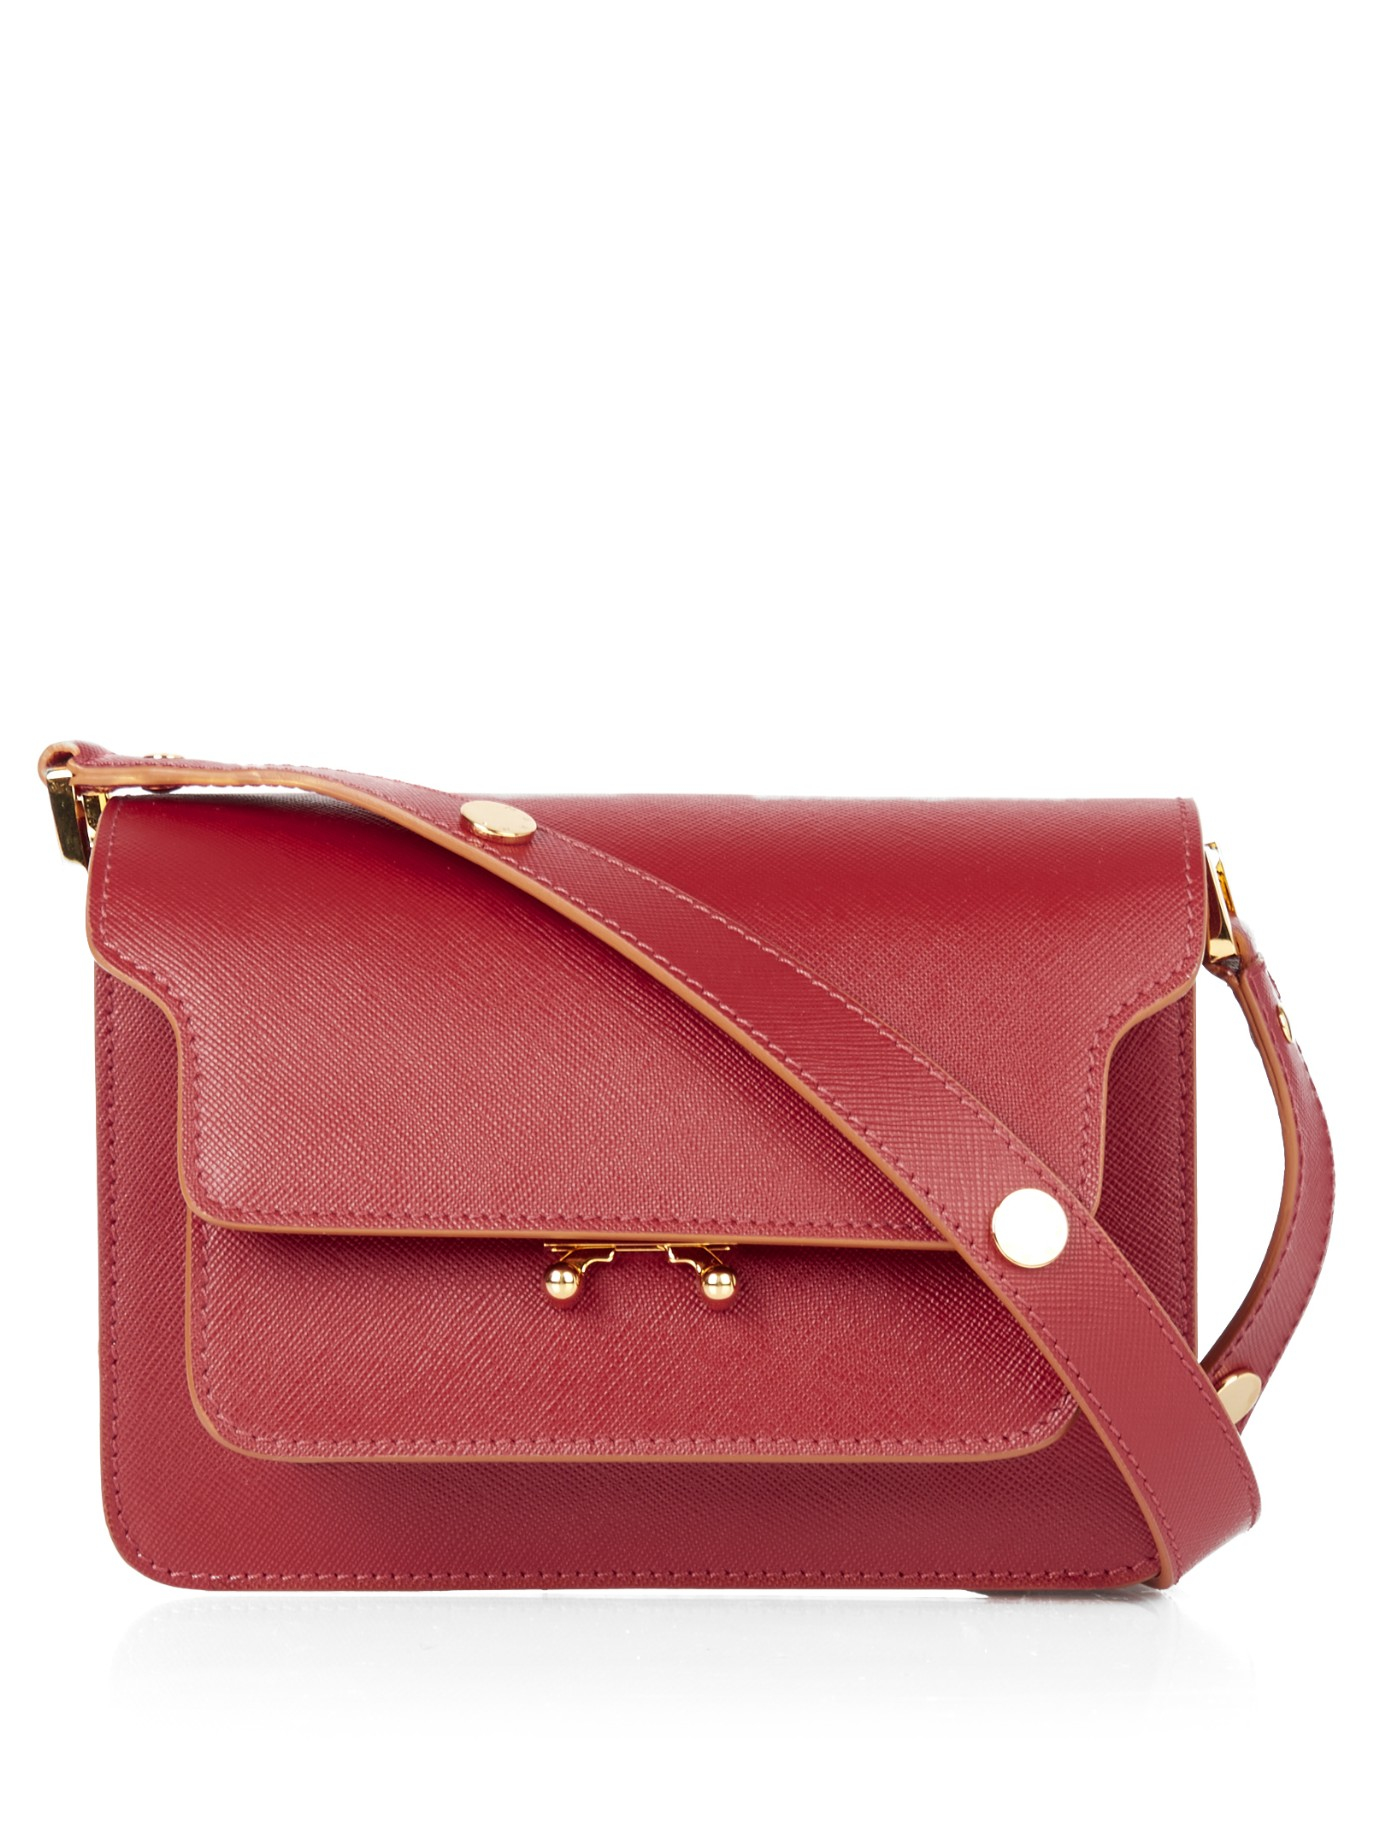 Lyst - Marni Trunk Mini Leather Shoulder Bag in Red